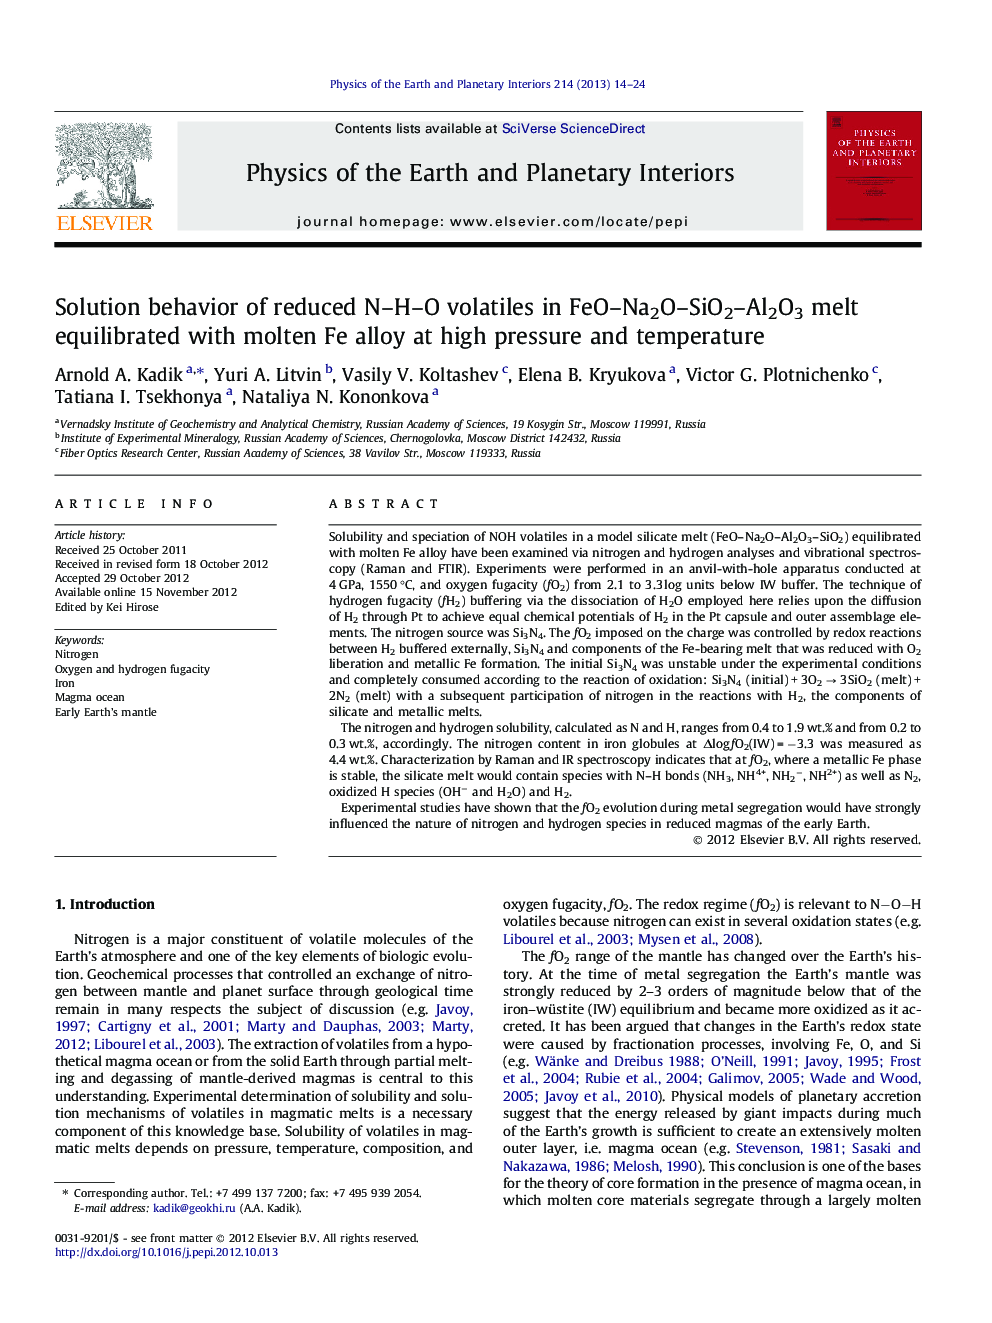 Solution behavior of reduced N–H–O volatiles in FeO–Na2O–SiO2–Al2O3 melt equilibrated with molten Fe alloy at high pressure and temperature